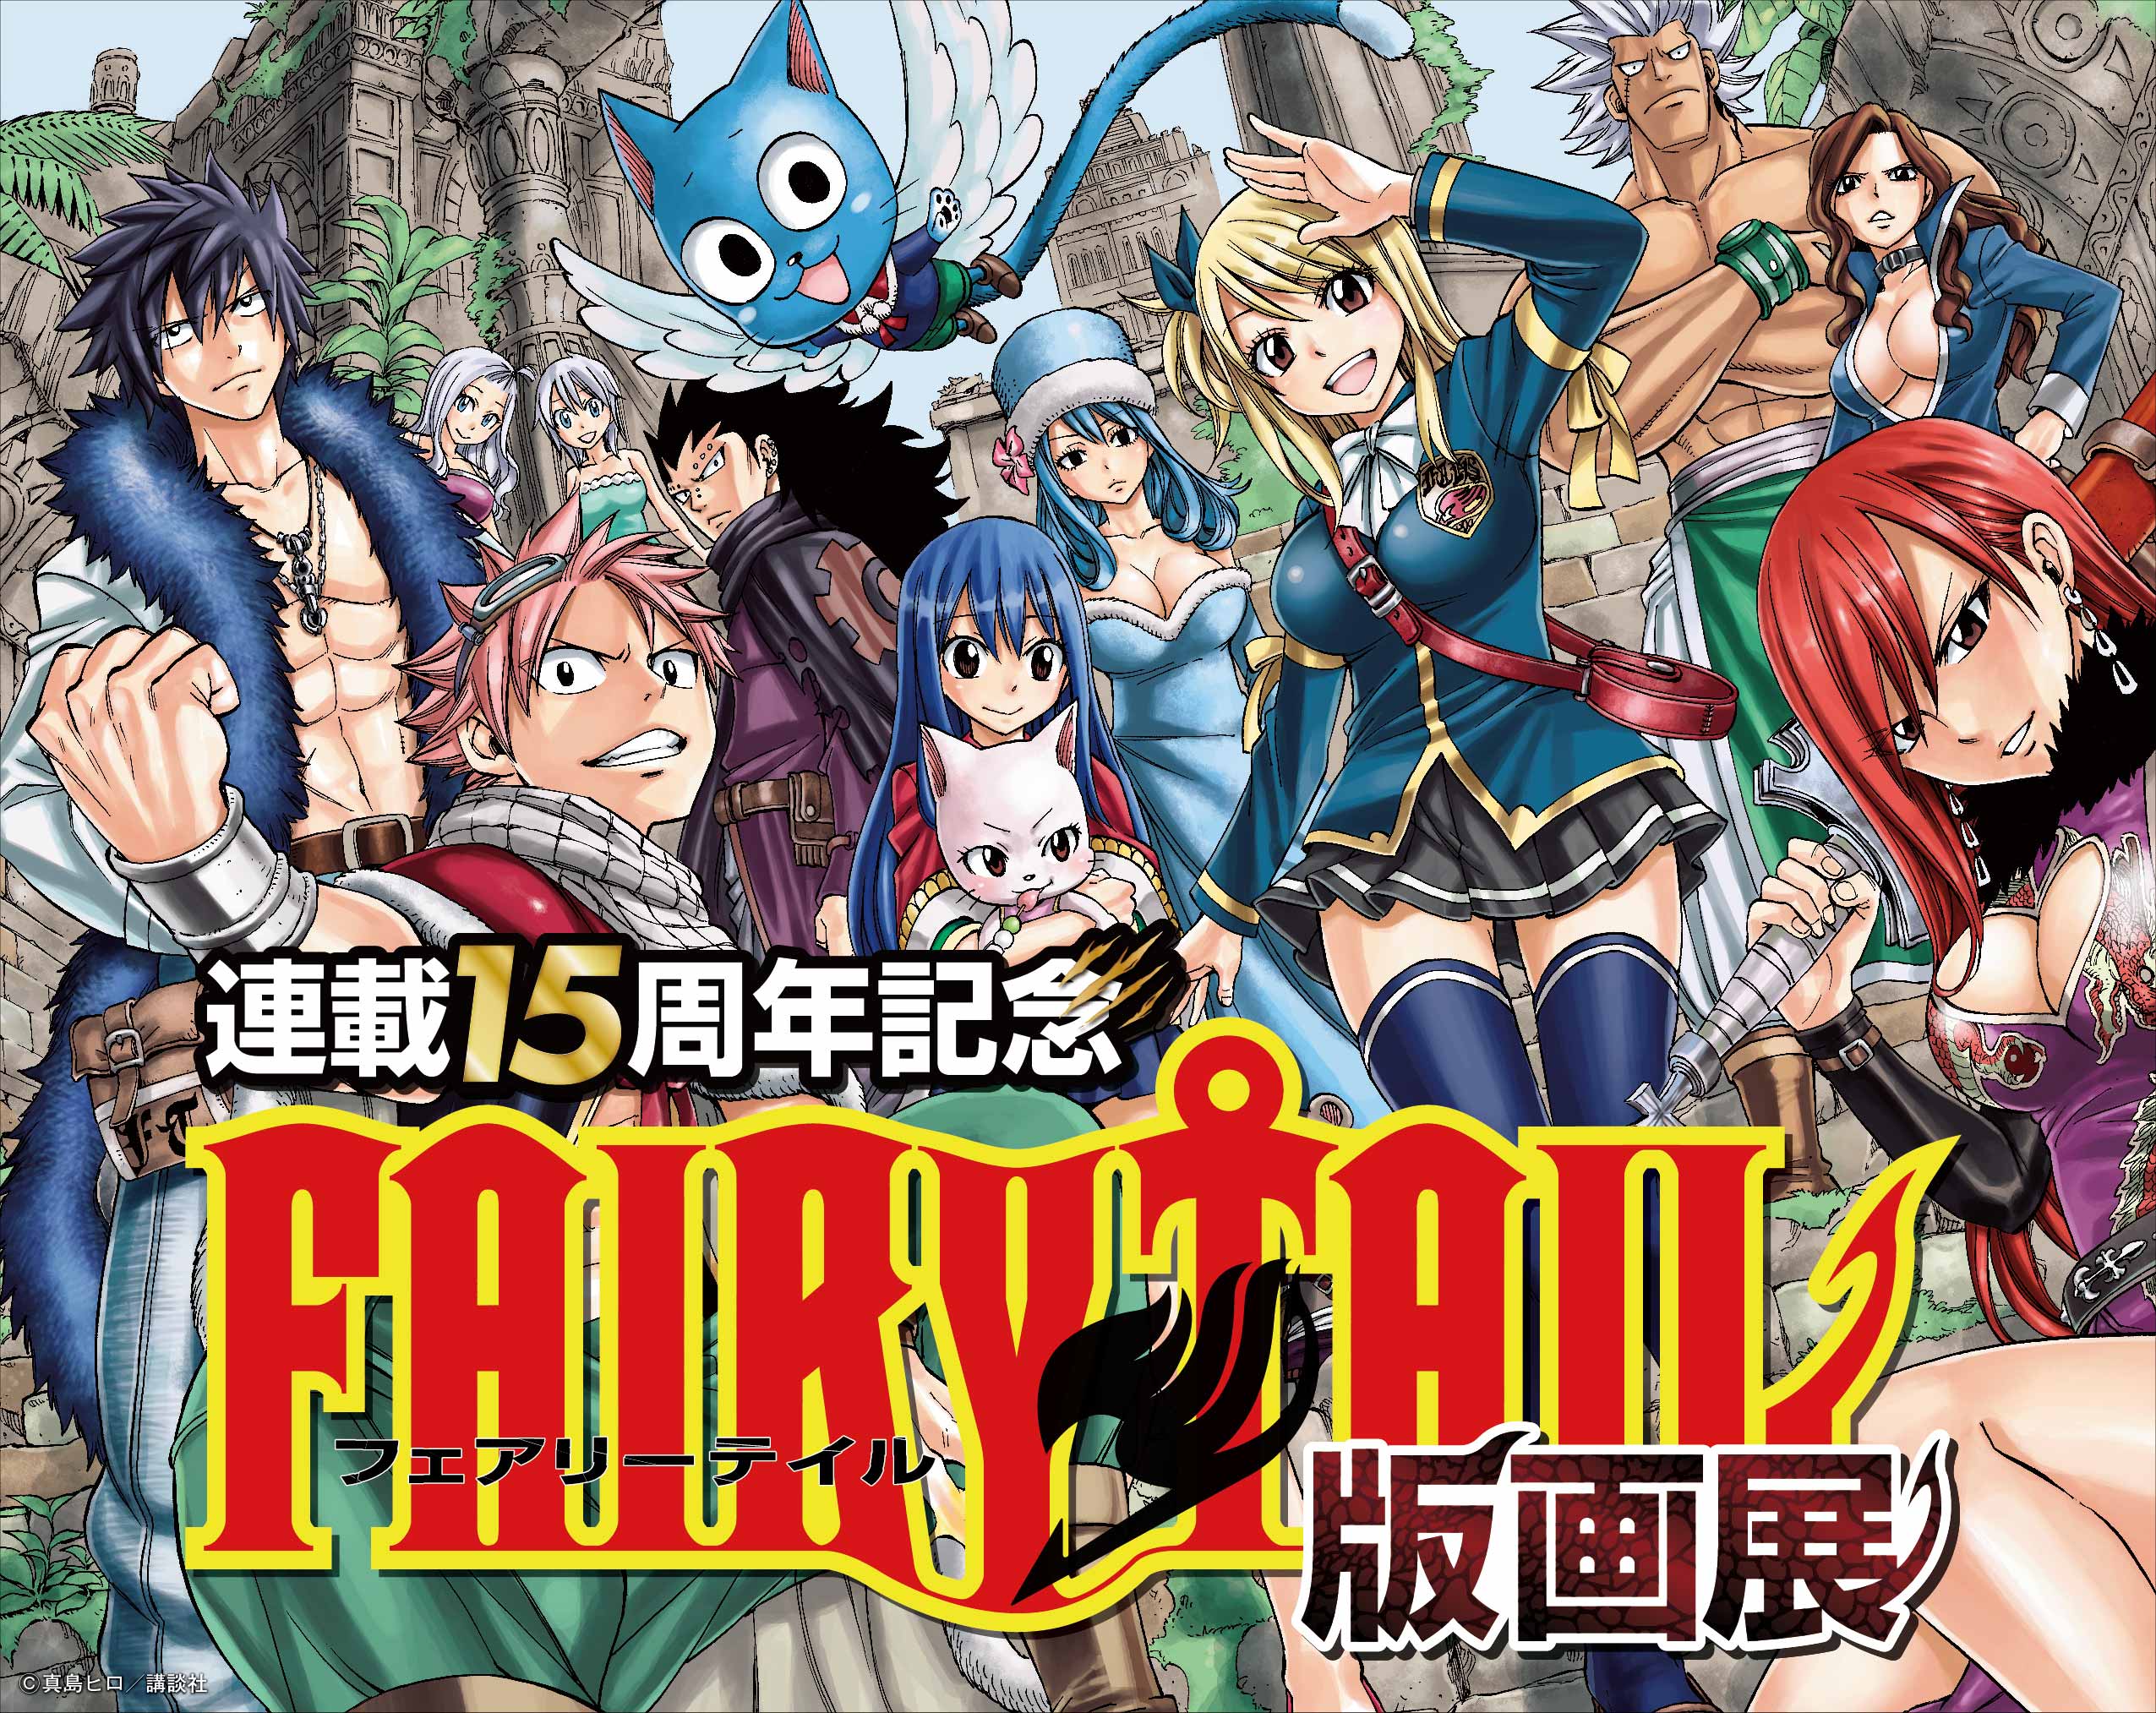 FAIRY TAIL/フェアリーテイル 原画展 入場限定グッズ - コミック 